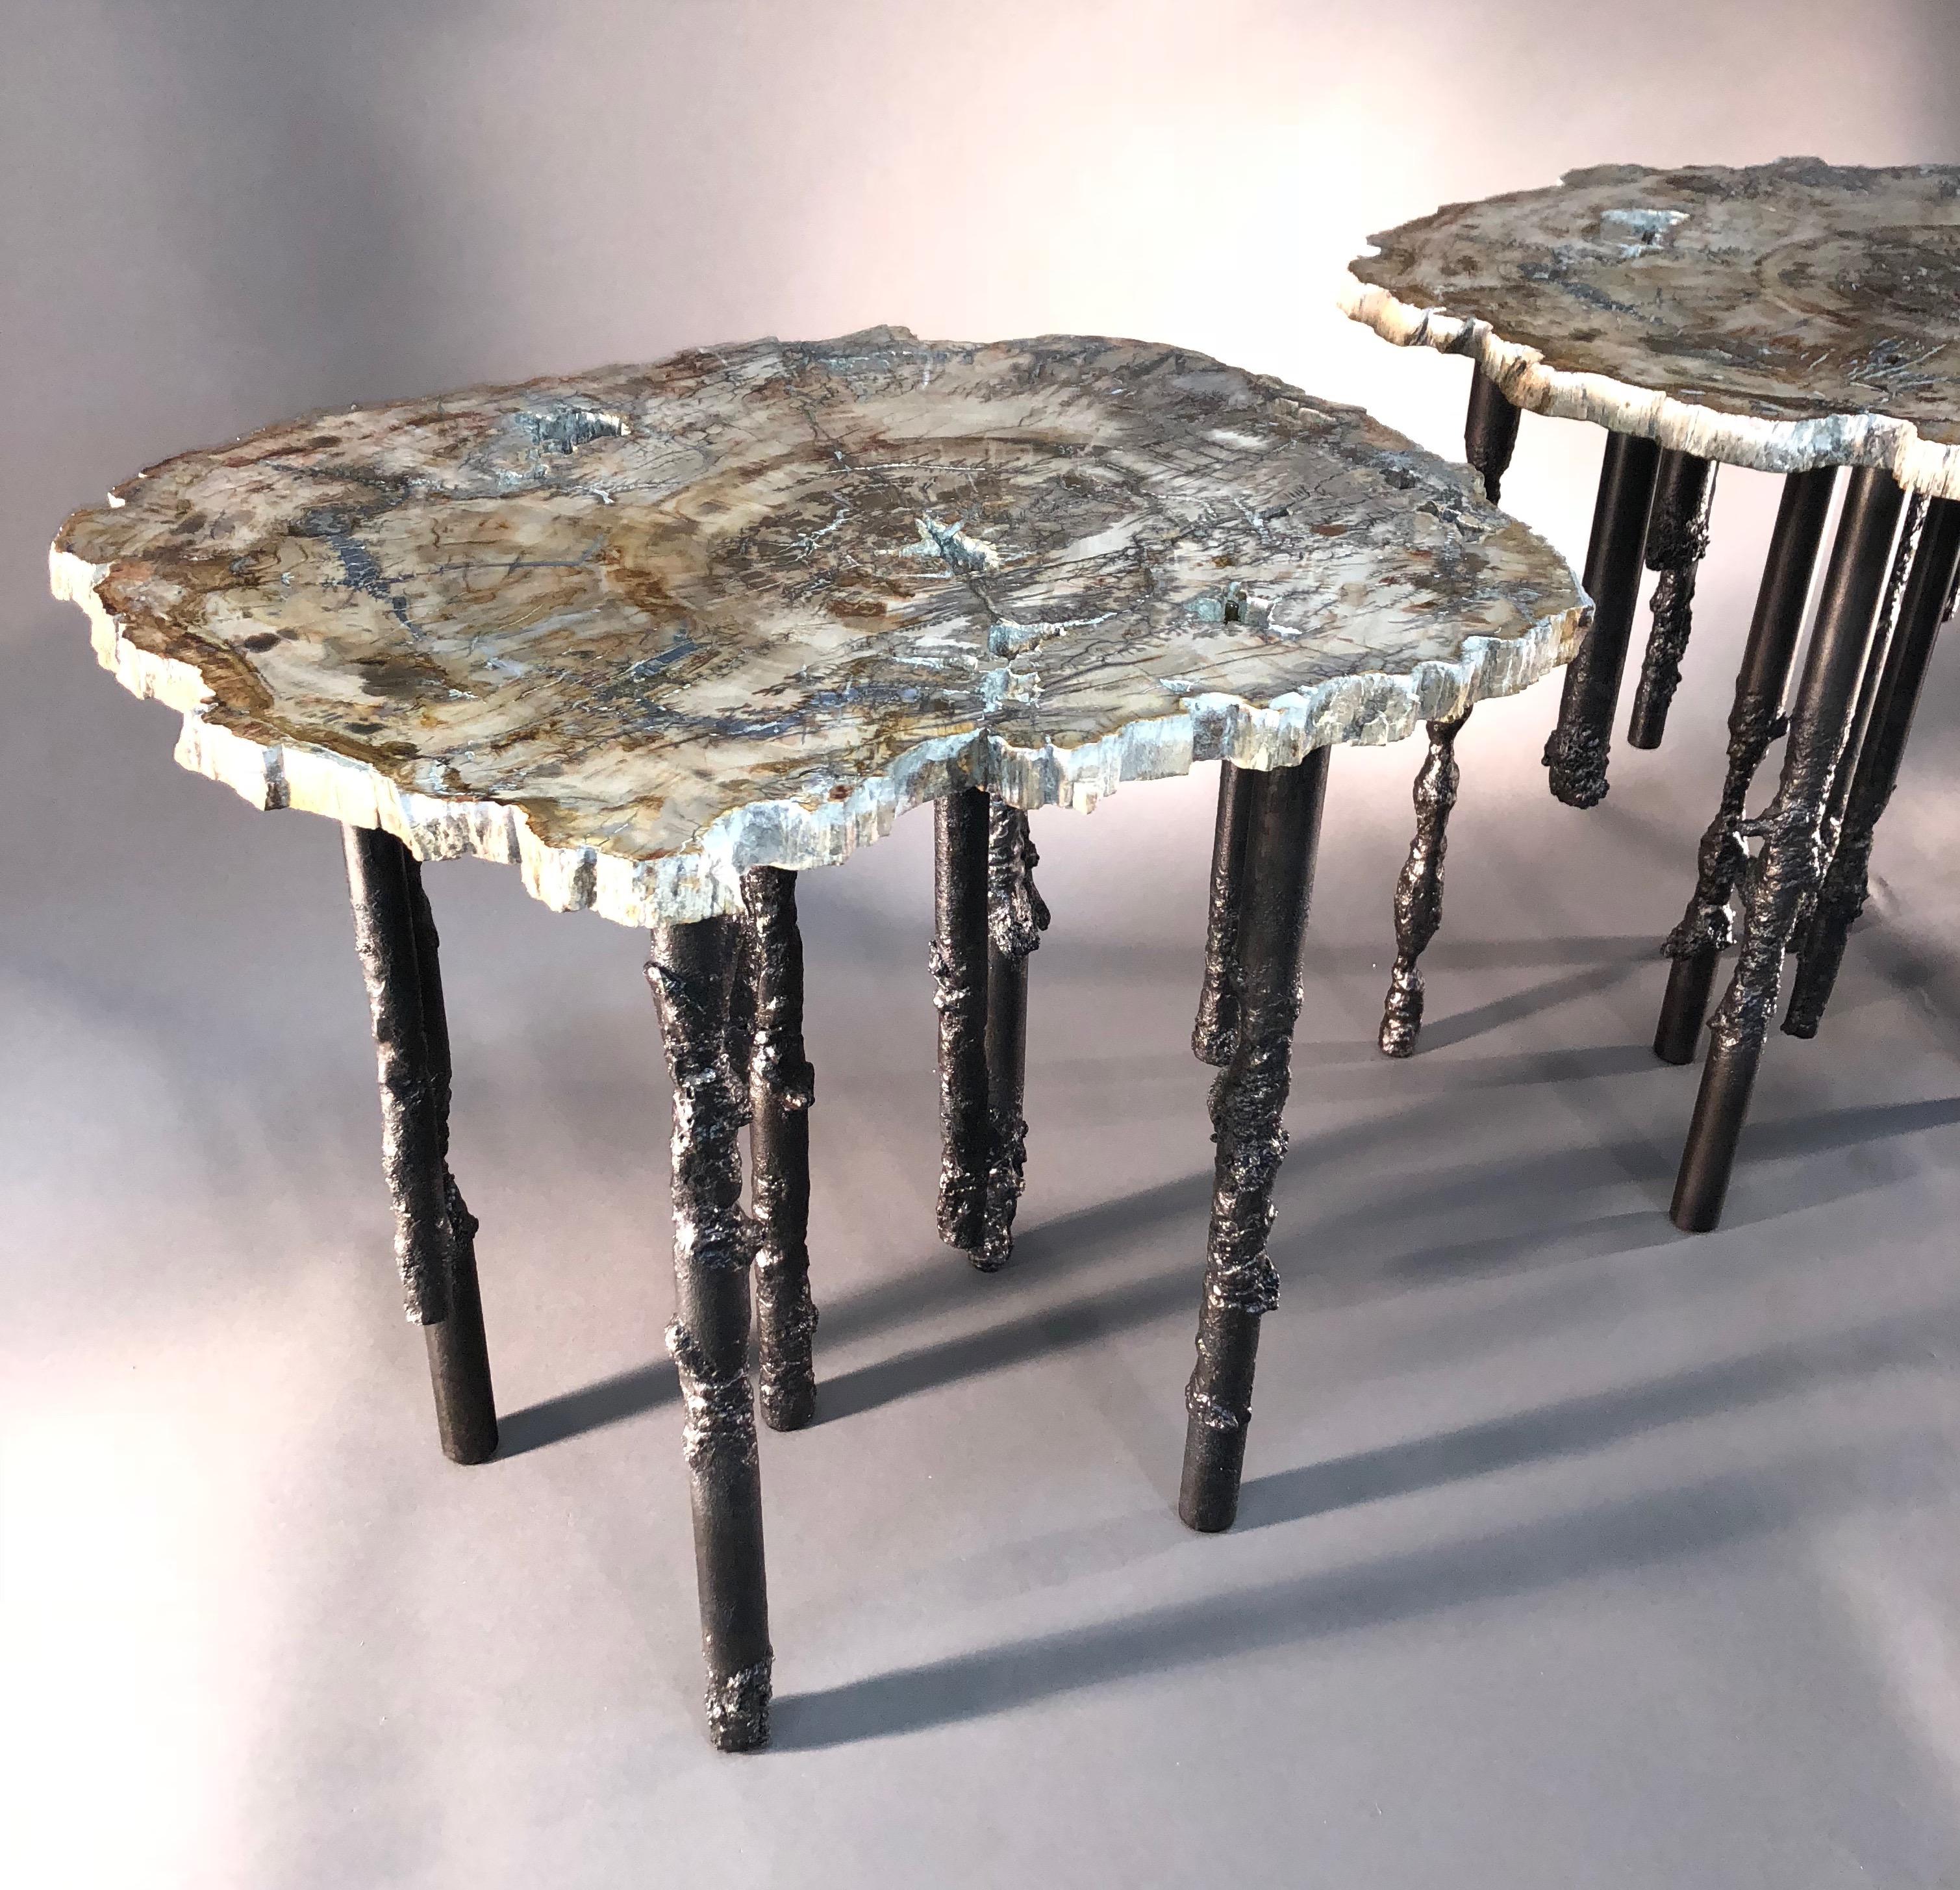 Madagascar Petrified wood top and iron base
Accent tables 
Unique
Measures: 18